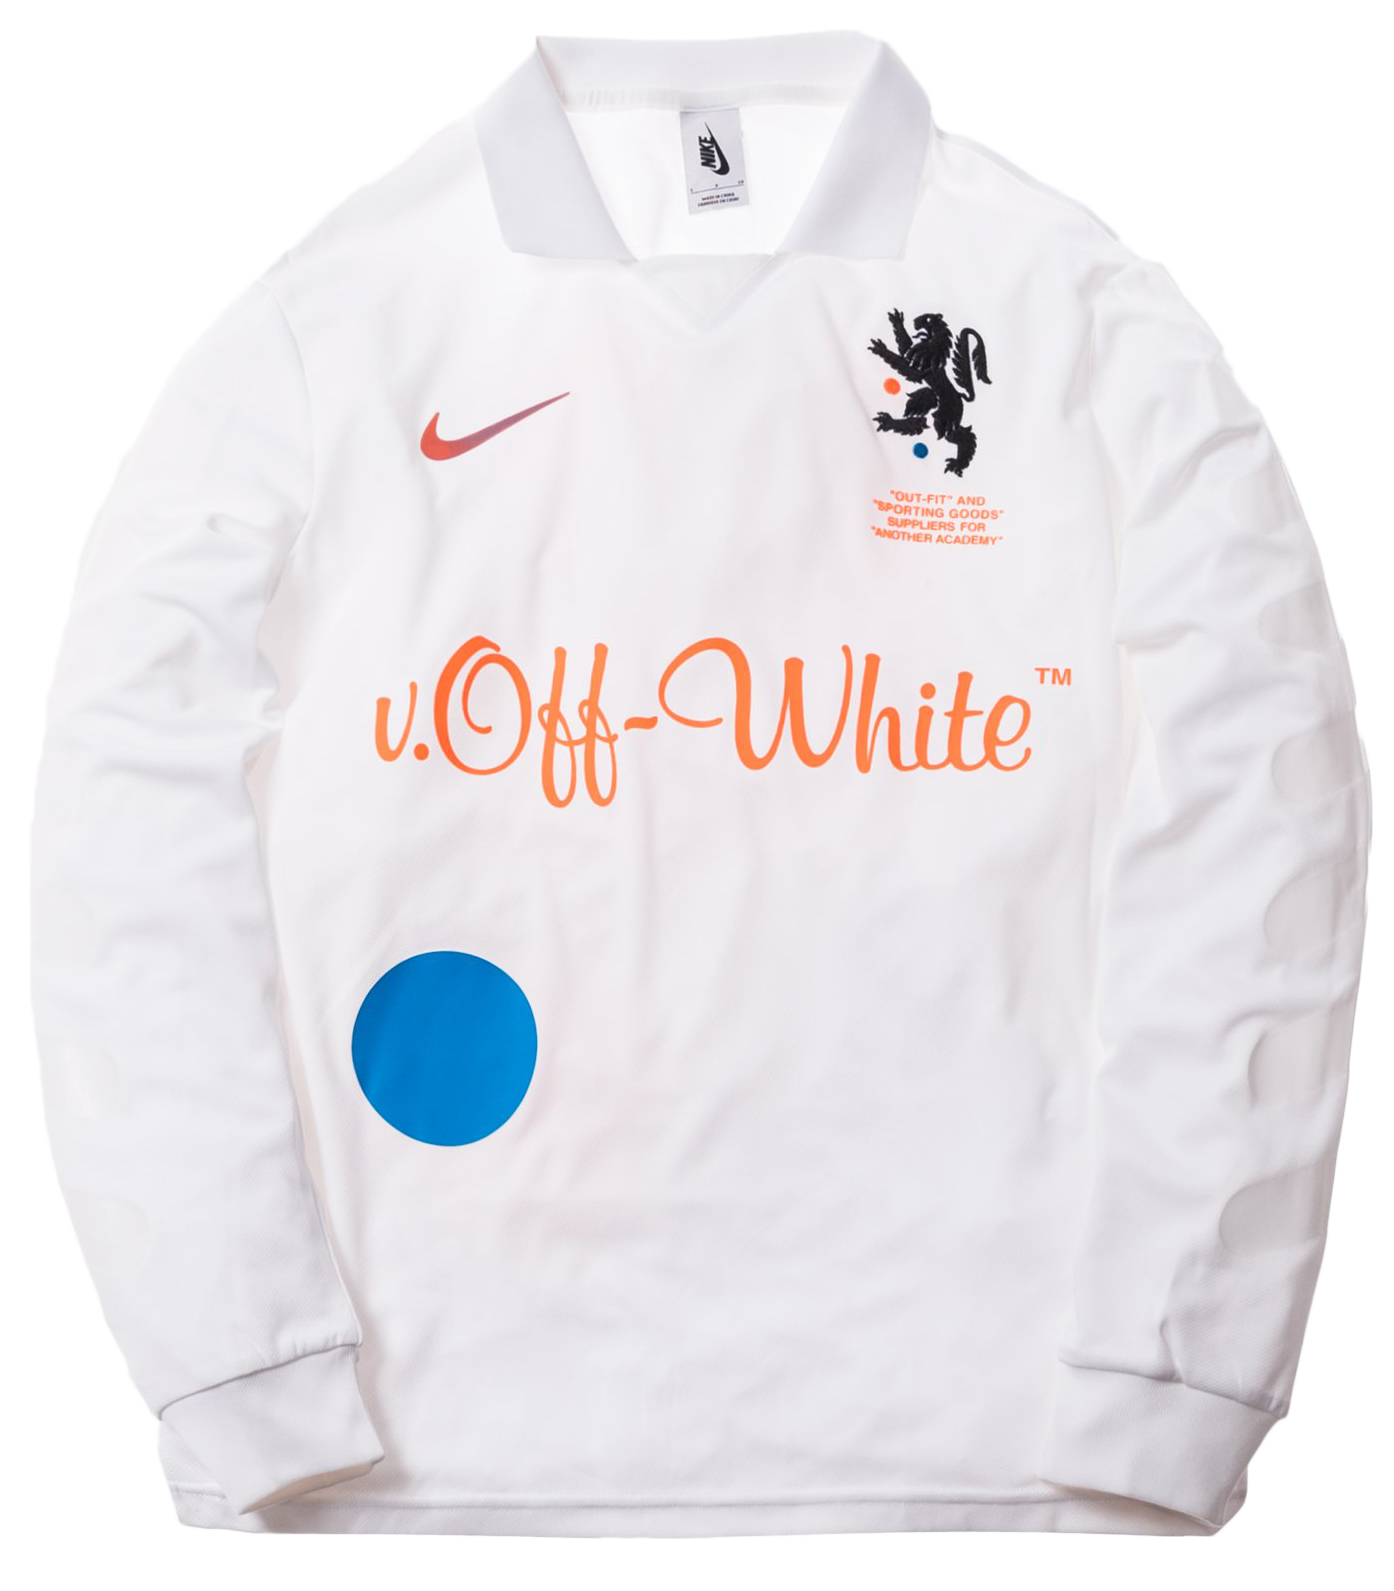 off white football jersey